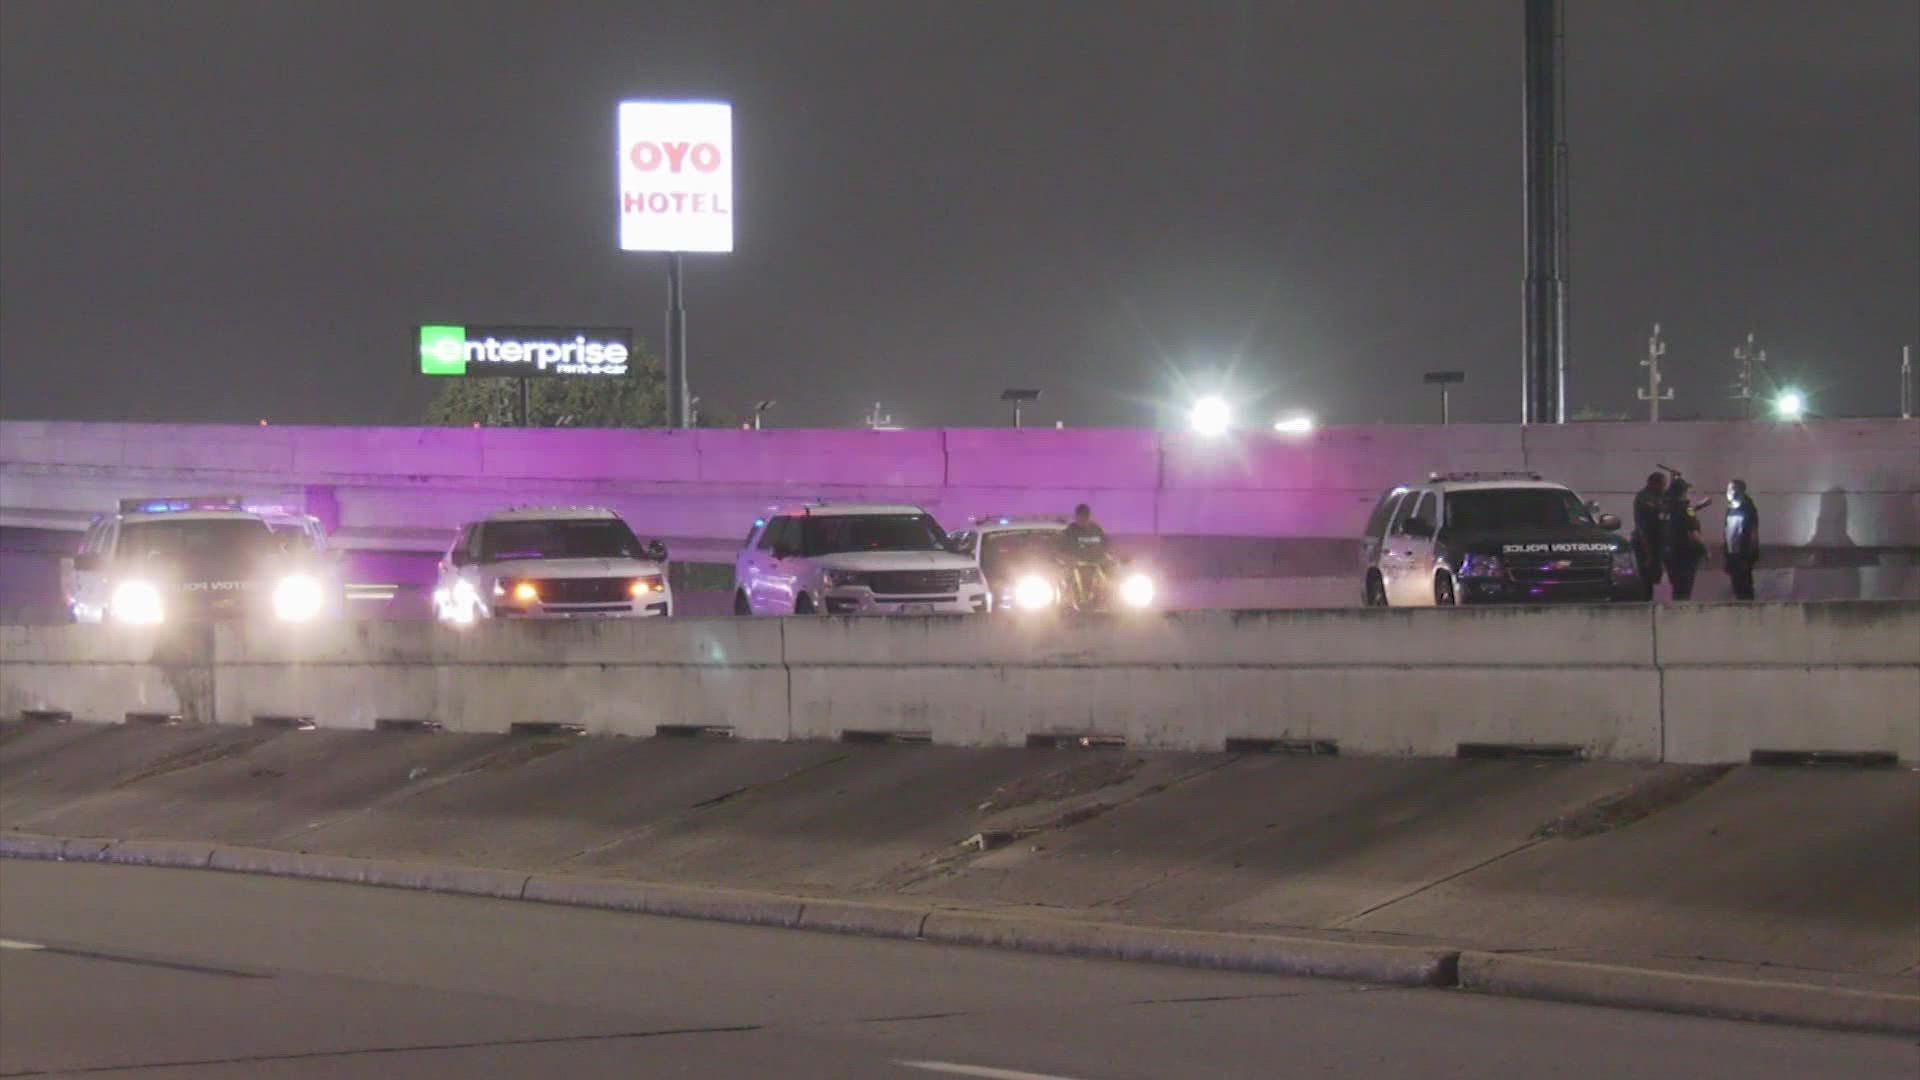 A woman died after being struck after being struck by a car on the Southwest Freeway early Monday.